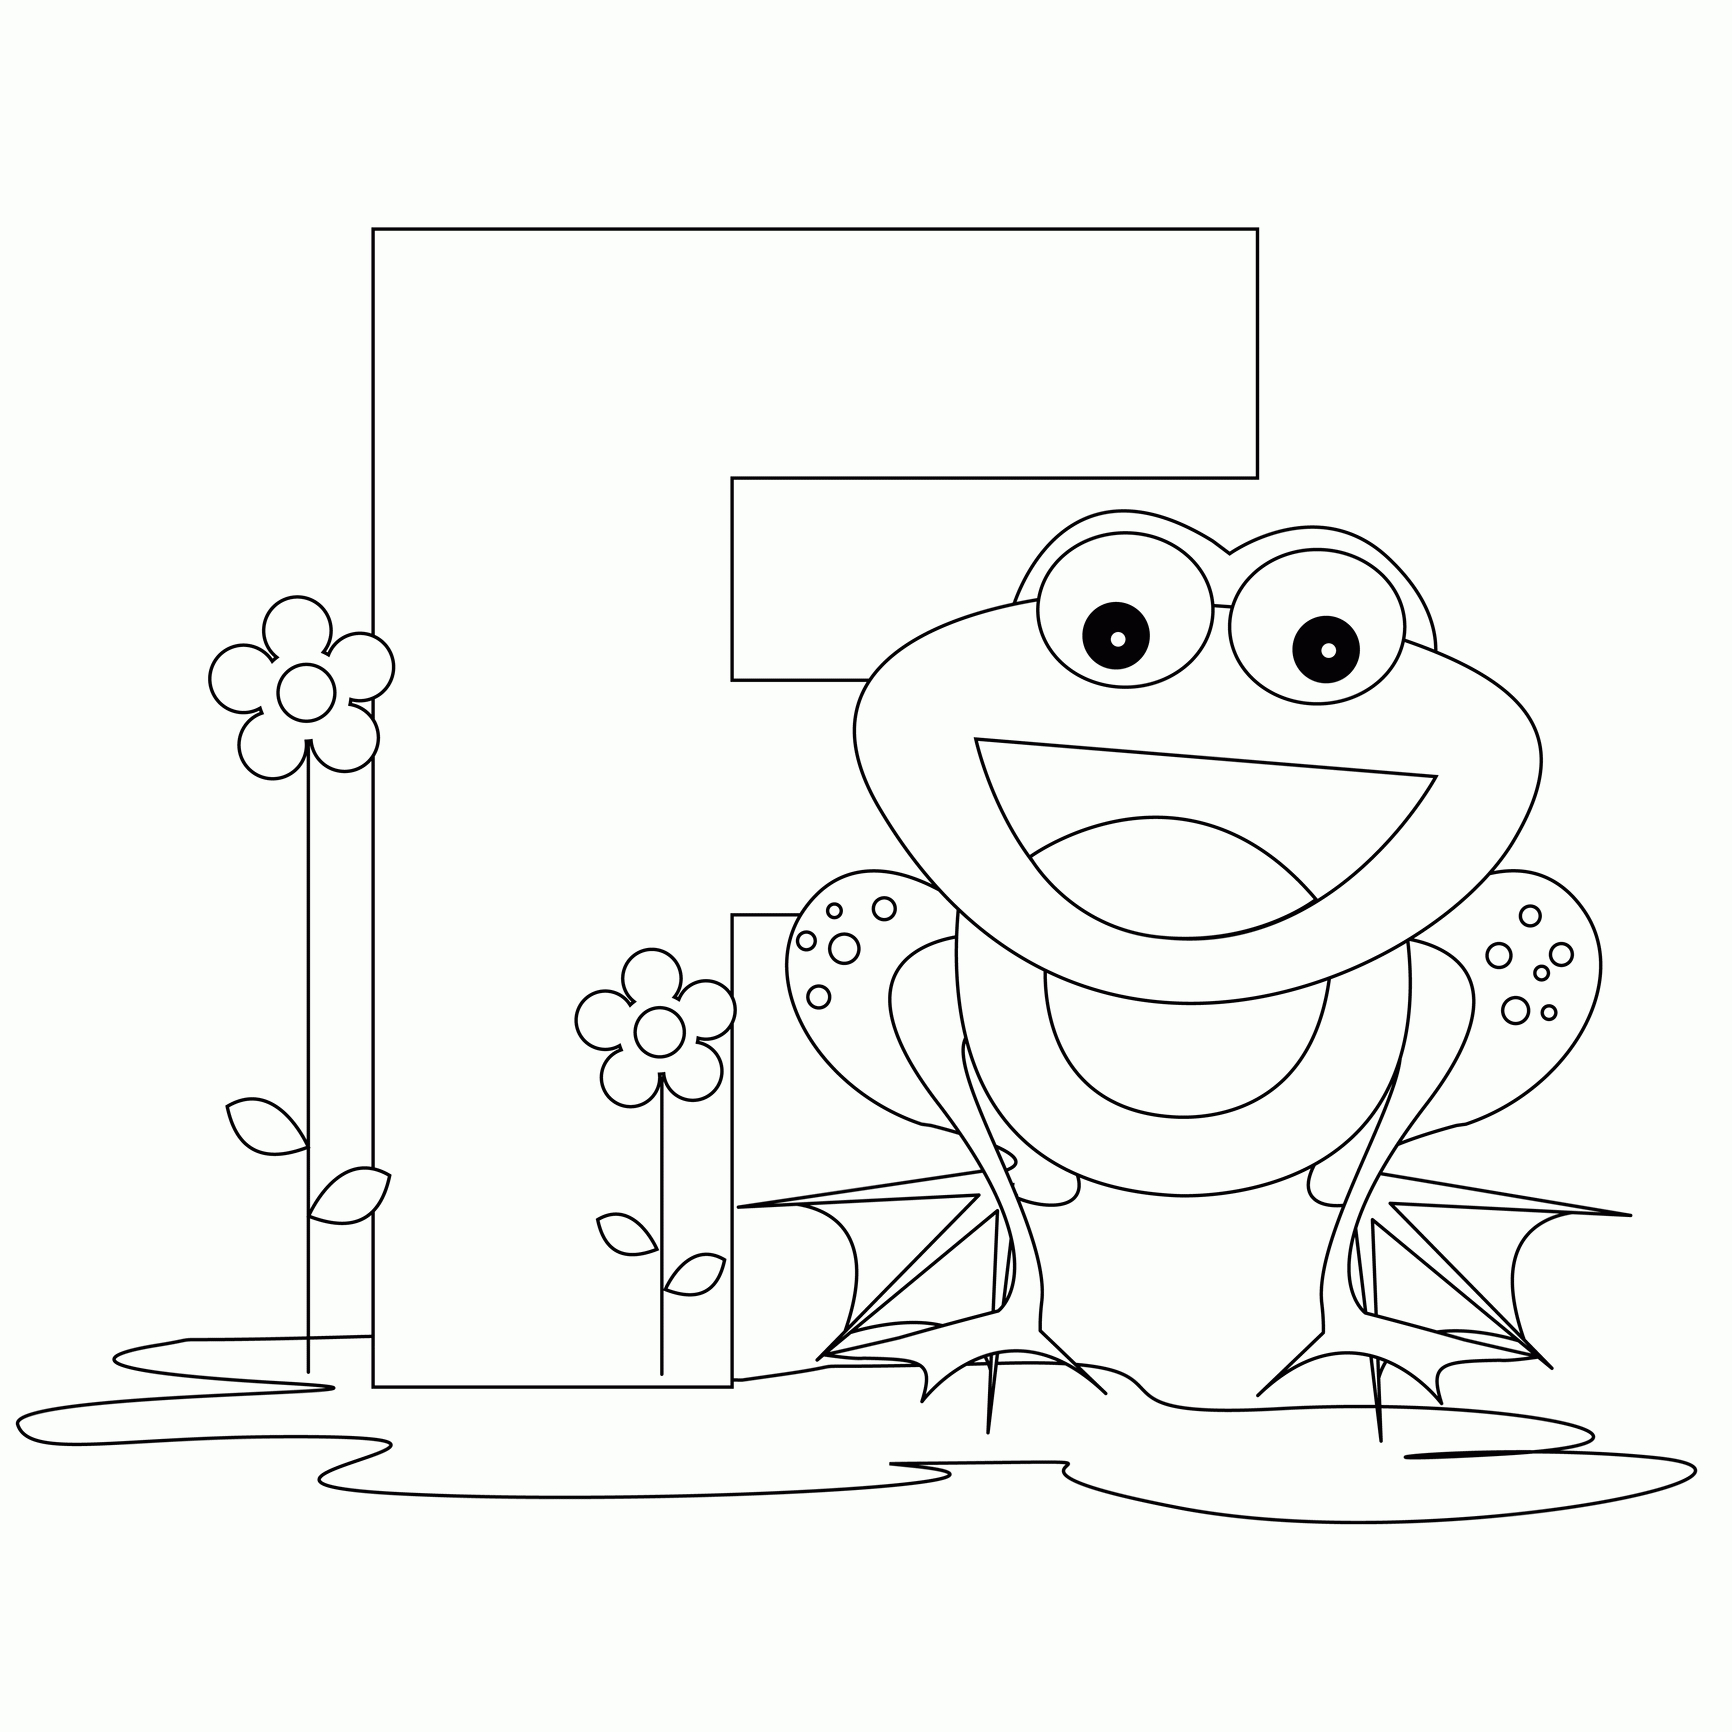 Free Printable Letter F Coloring Pages - Coloring Home pertaining to Letter F Worksheets Coloring